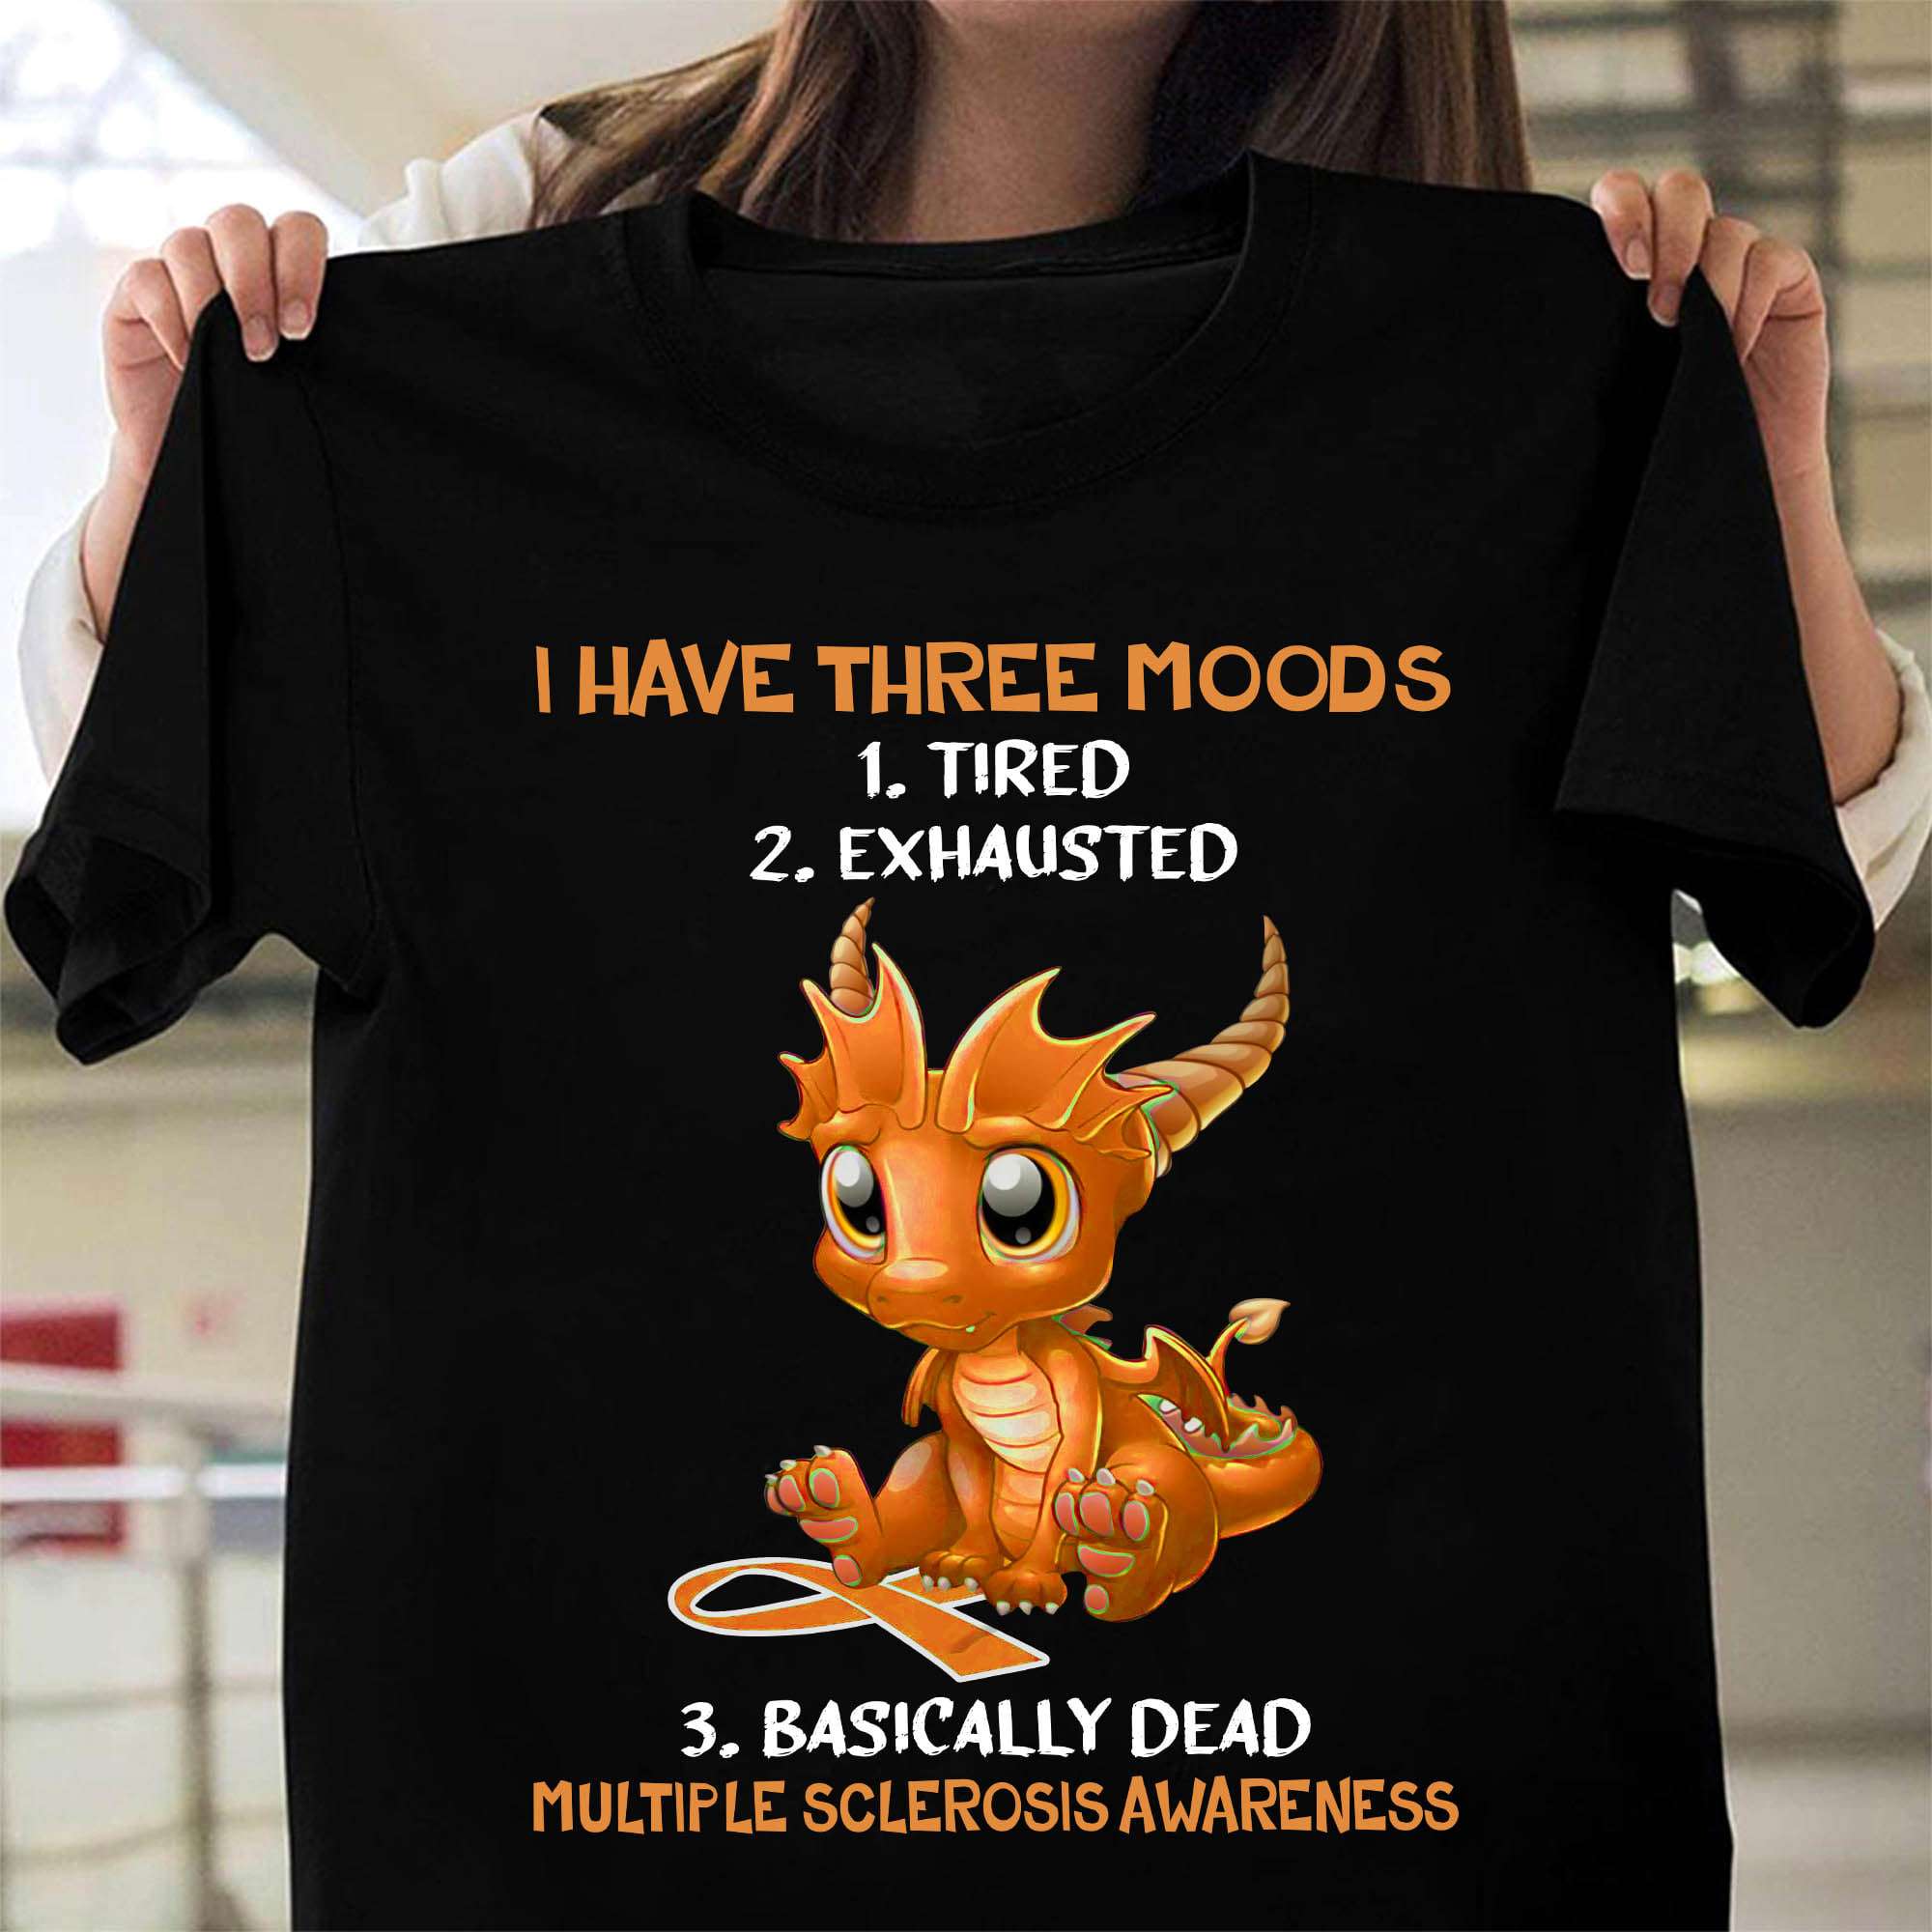 Multiple Sclerosis Dragon - I have three moods tired exhausted basically dead Multiple Sclerosis Awareness